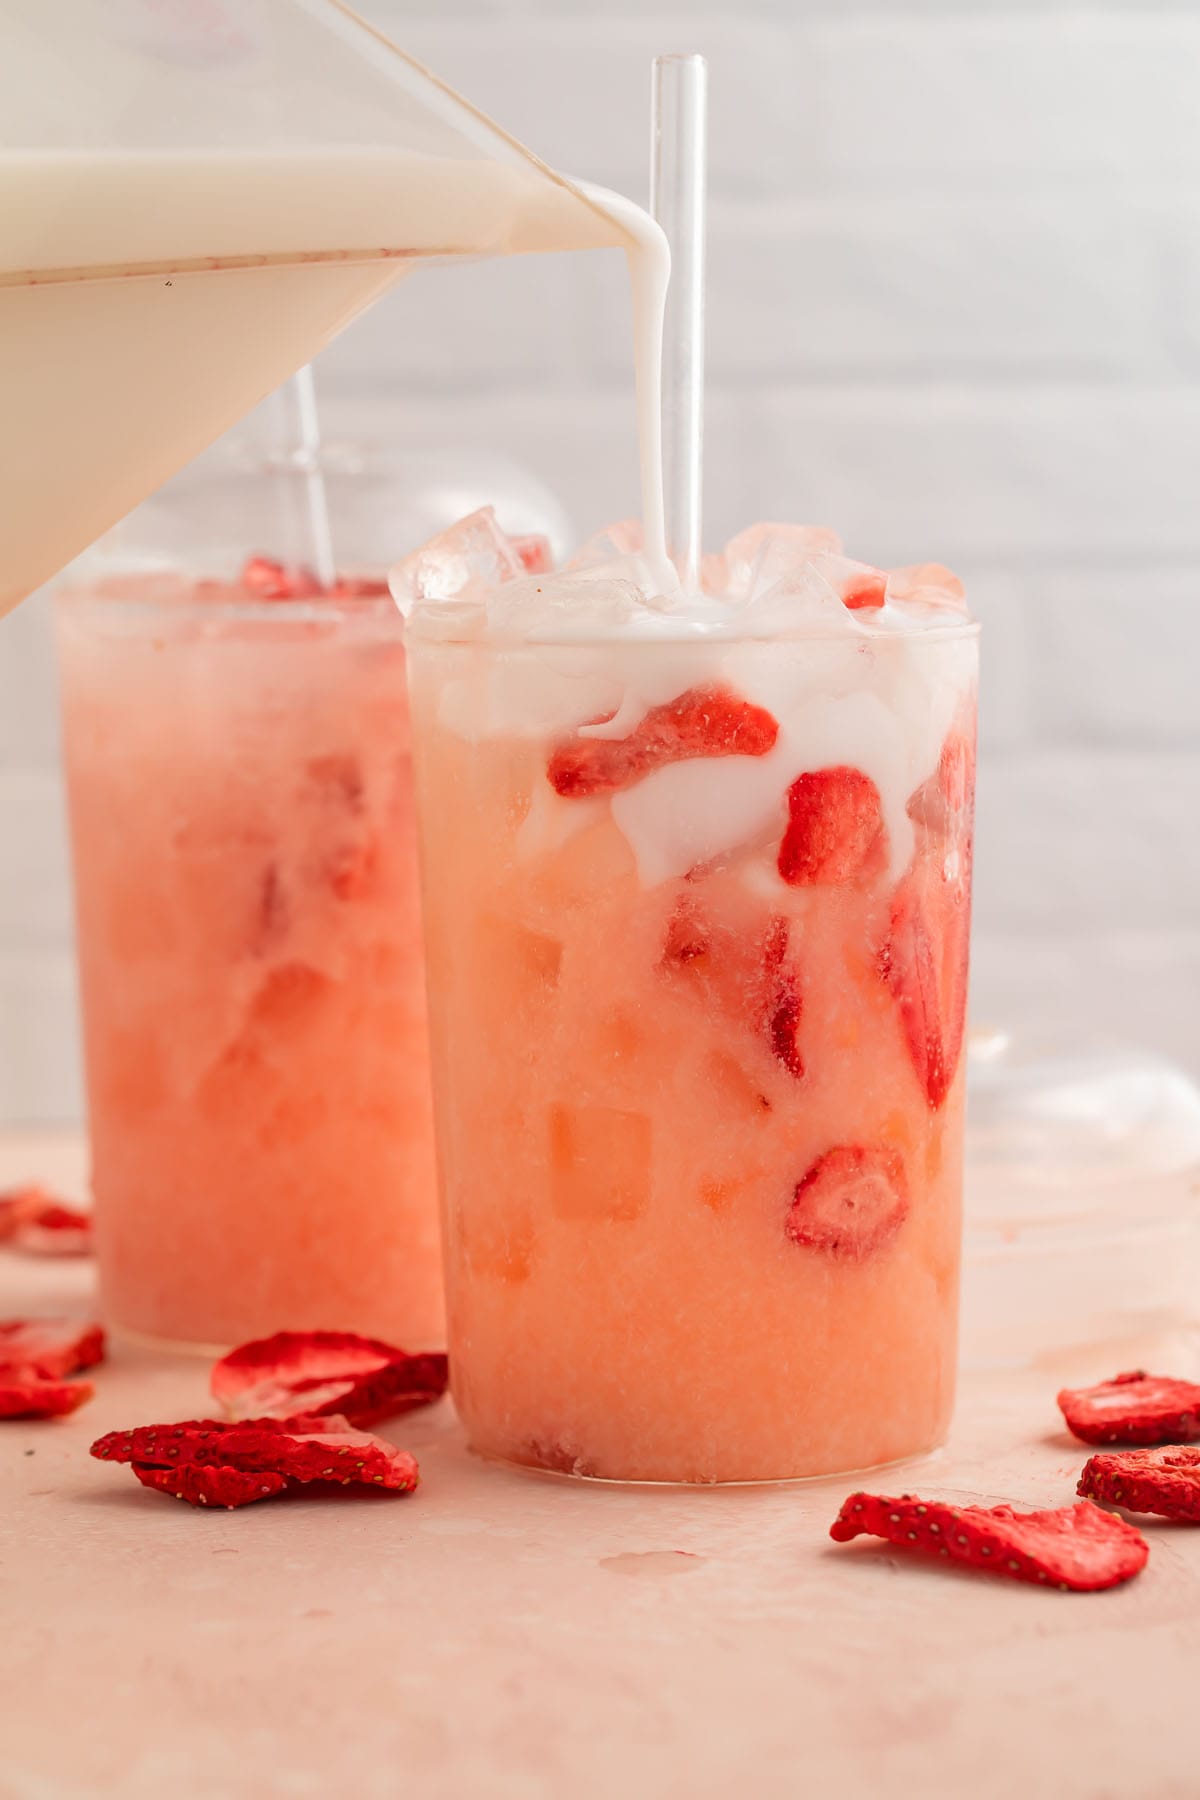 Milk being poured into a glass holding a pink drink copycat with freeze-dried strawberries.